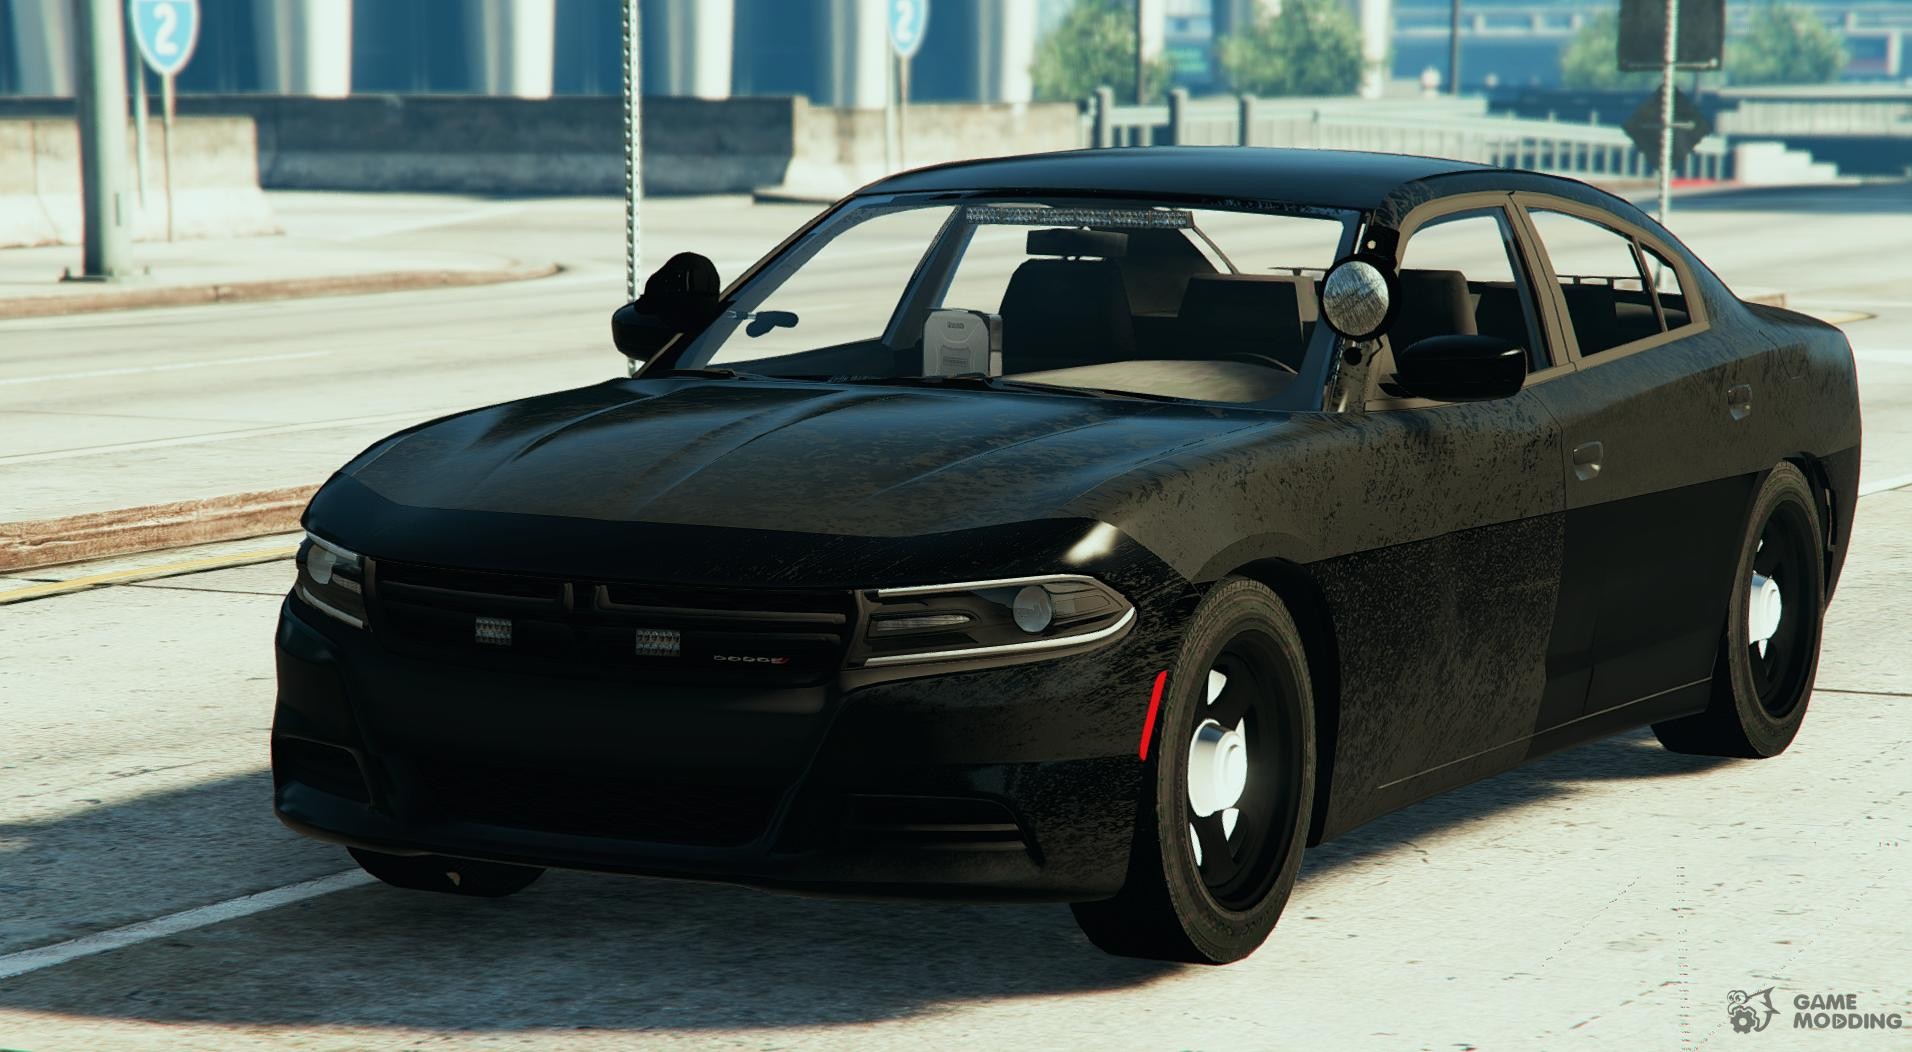 2015 Unmarked Dodge Charger DEV for GTA 5